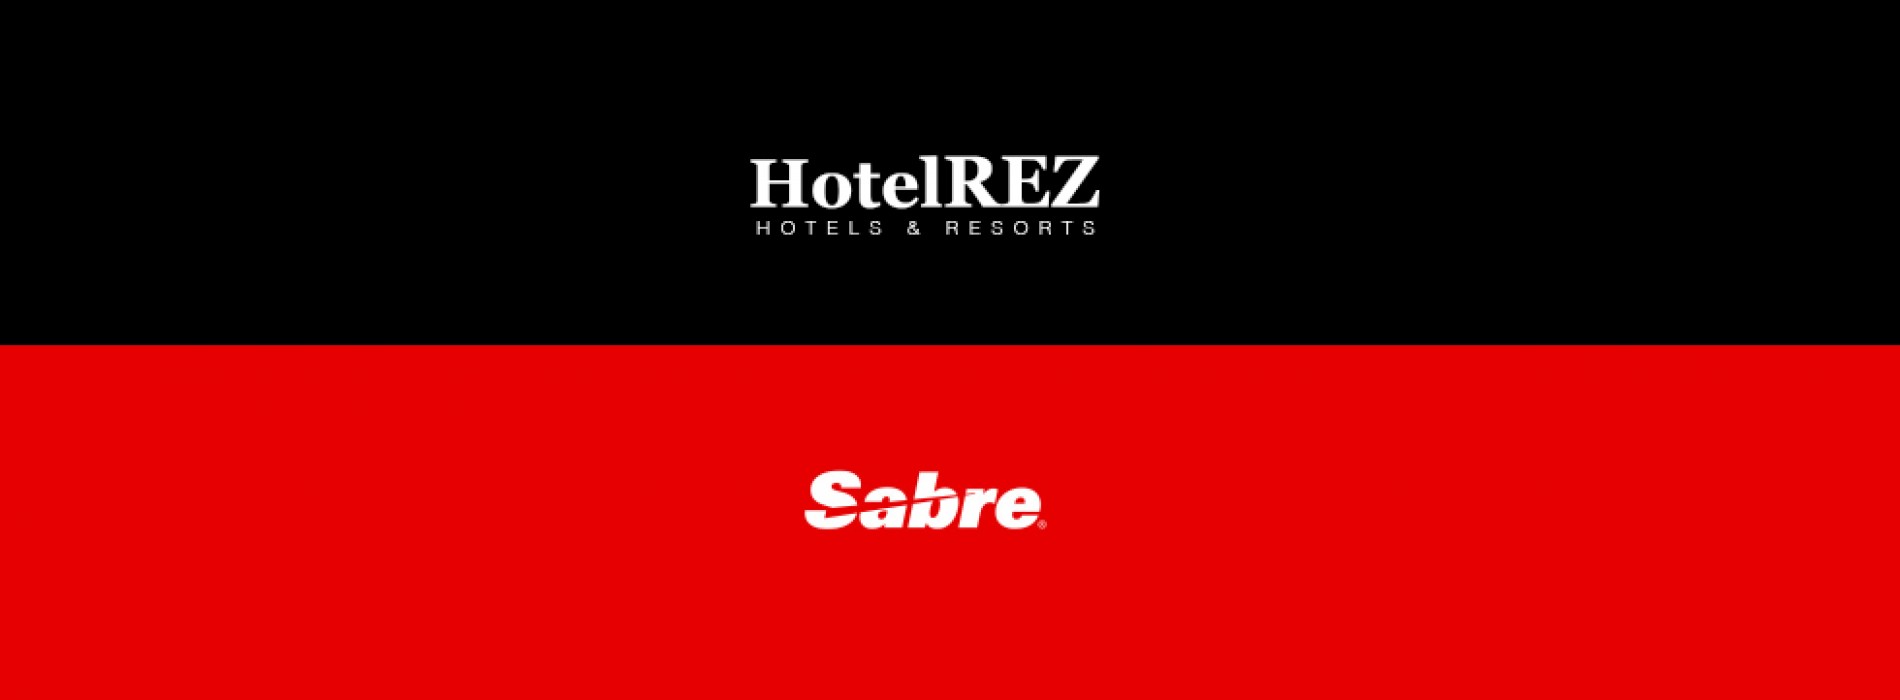 HotelREZ Hotels & Resorts adopts Sabre’s hospitality solutions to provide customers with industry-leading reservation technology